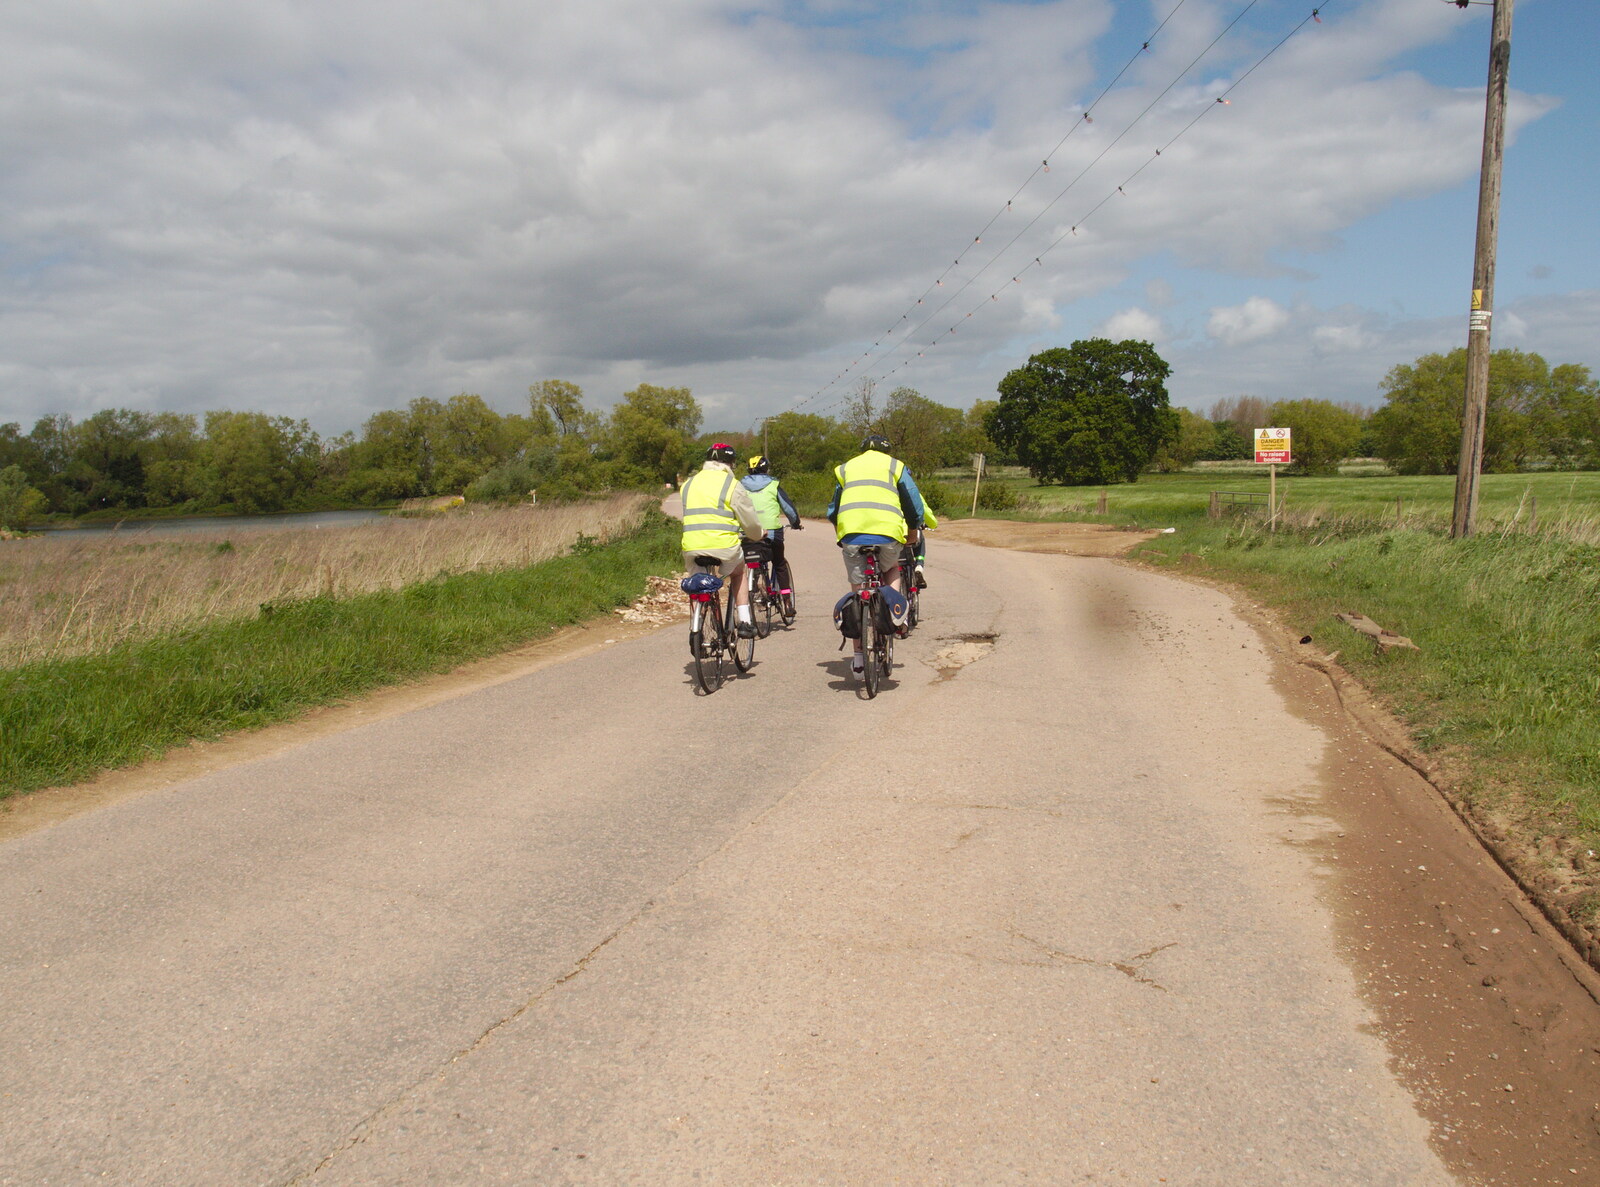 The Sagas head off from A Return to Bedford: the BSCC Annual Weekend Away, Shefford, Bedfordshire - 10th May 2014